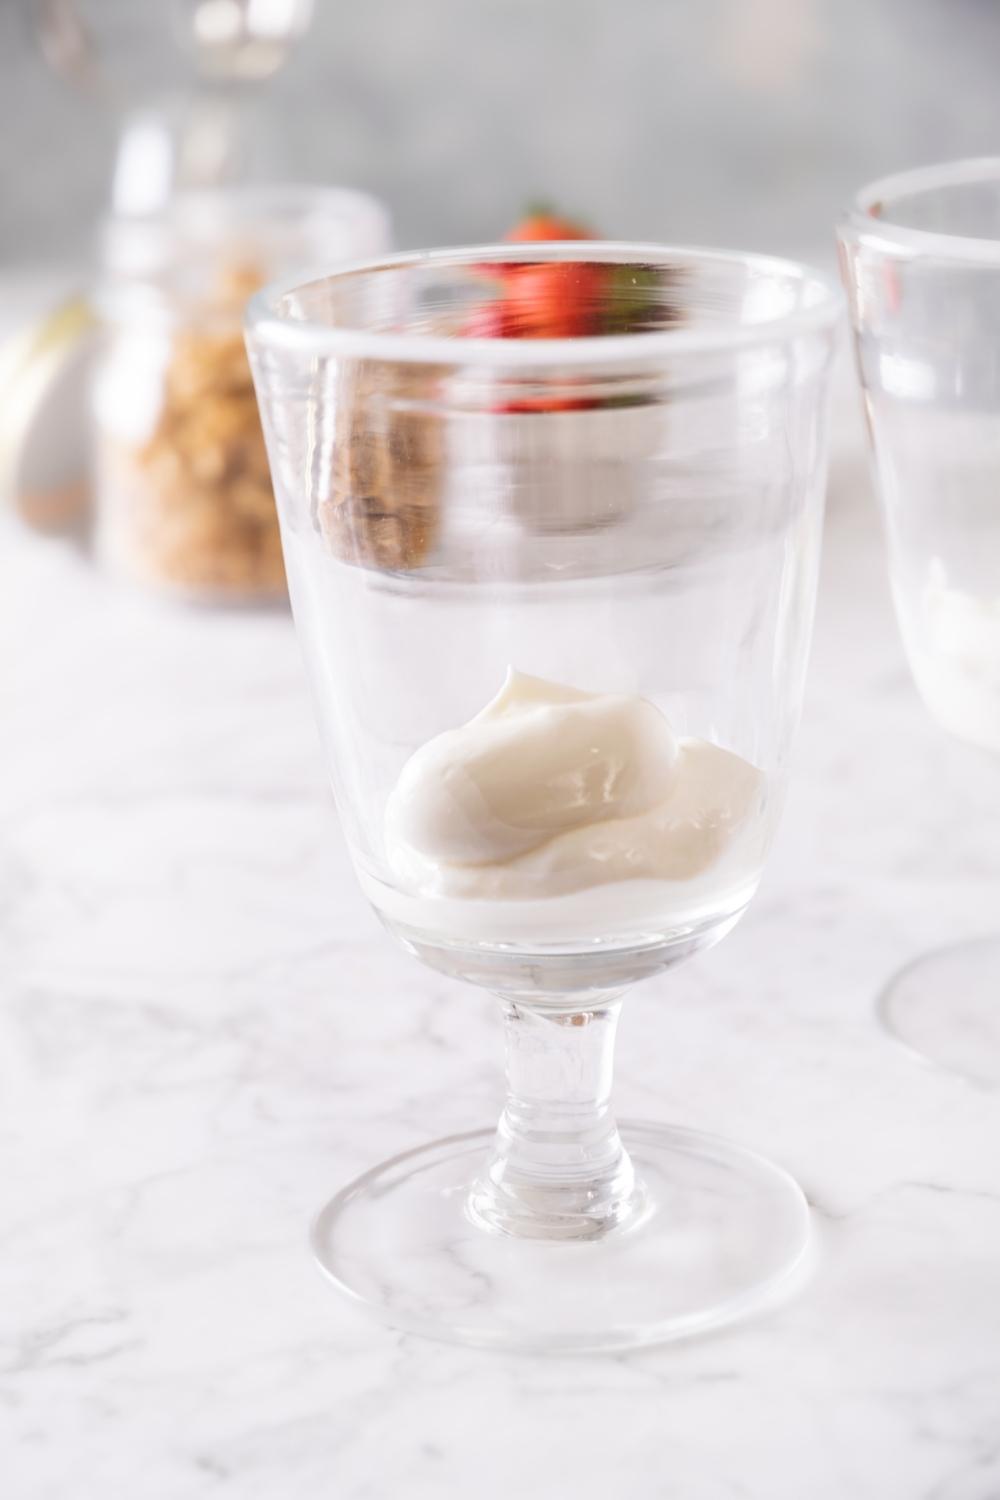 parfait glass with a layer of yogurt at the bottom